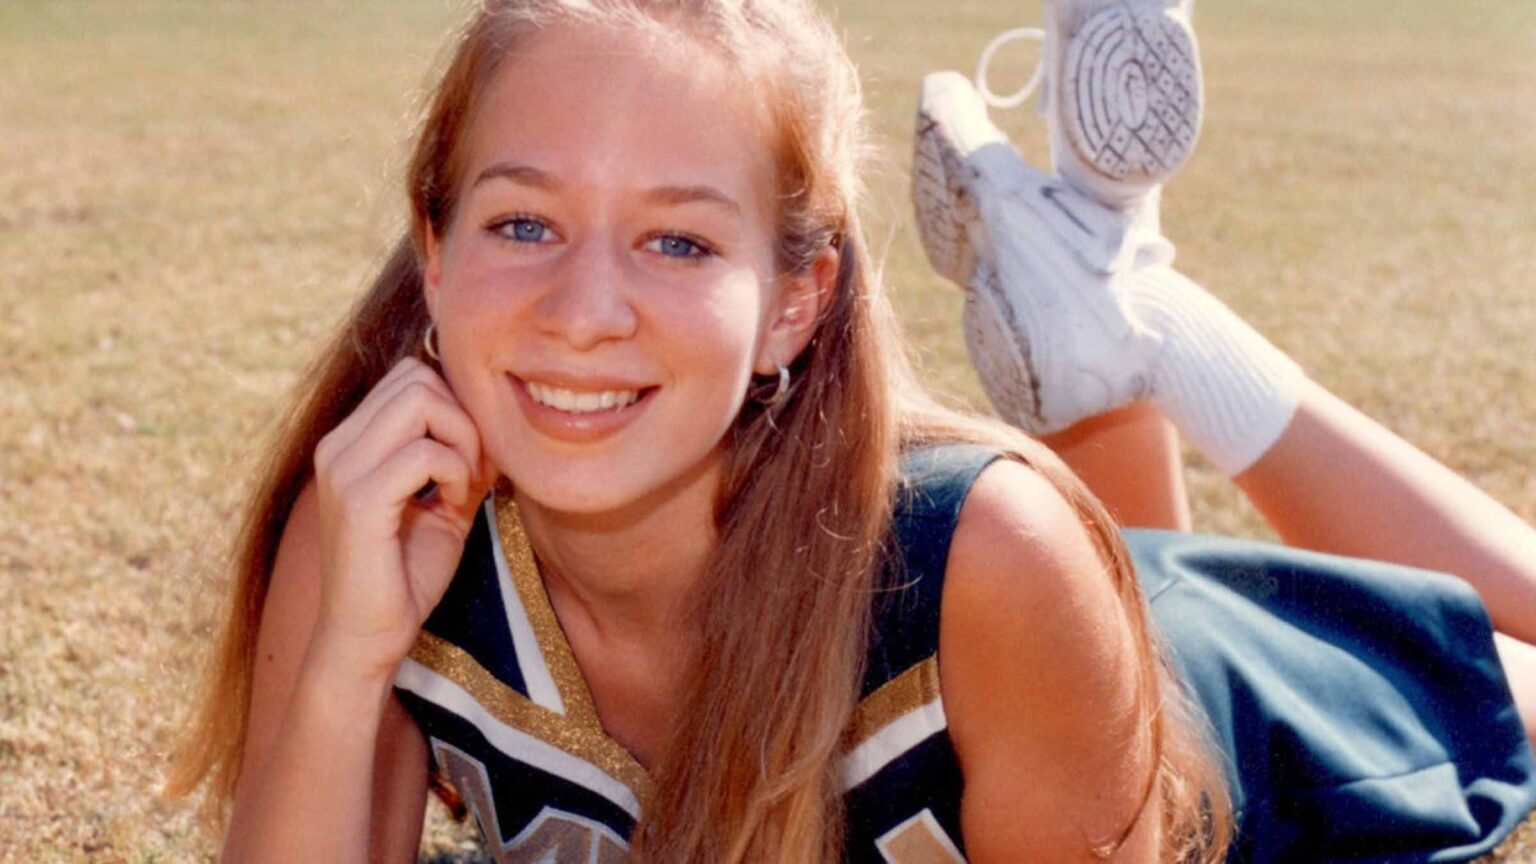 16 years after the disappearance of Natalee Holloway, we have to wonder if we'll ever see her killer brought to justice. Dive in to see her father's take.